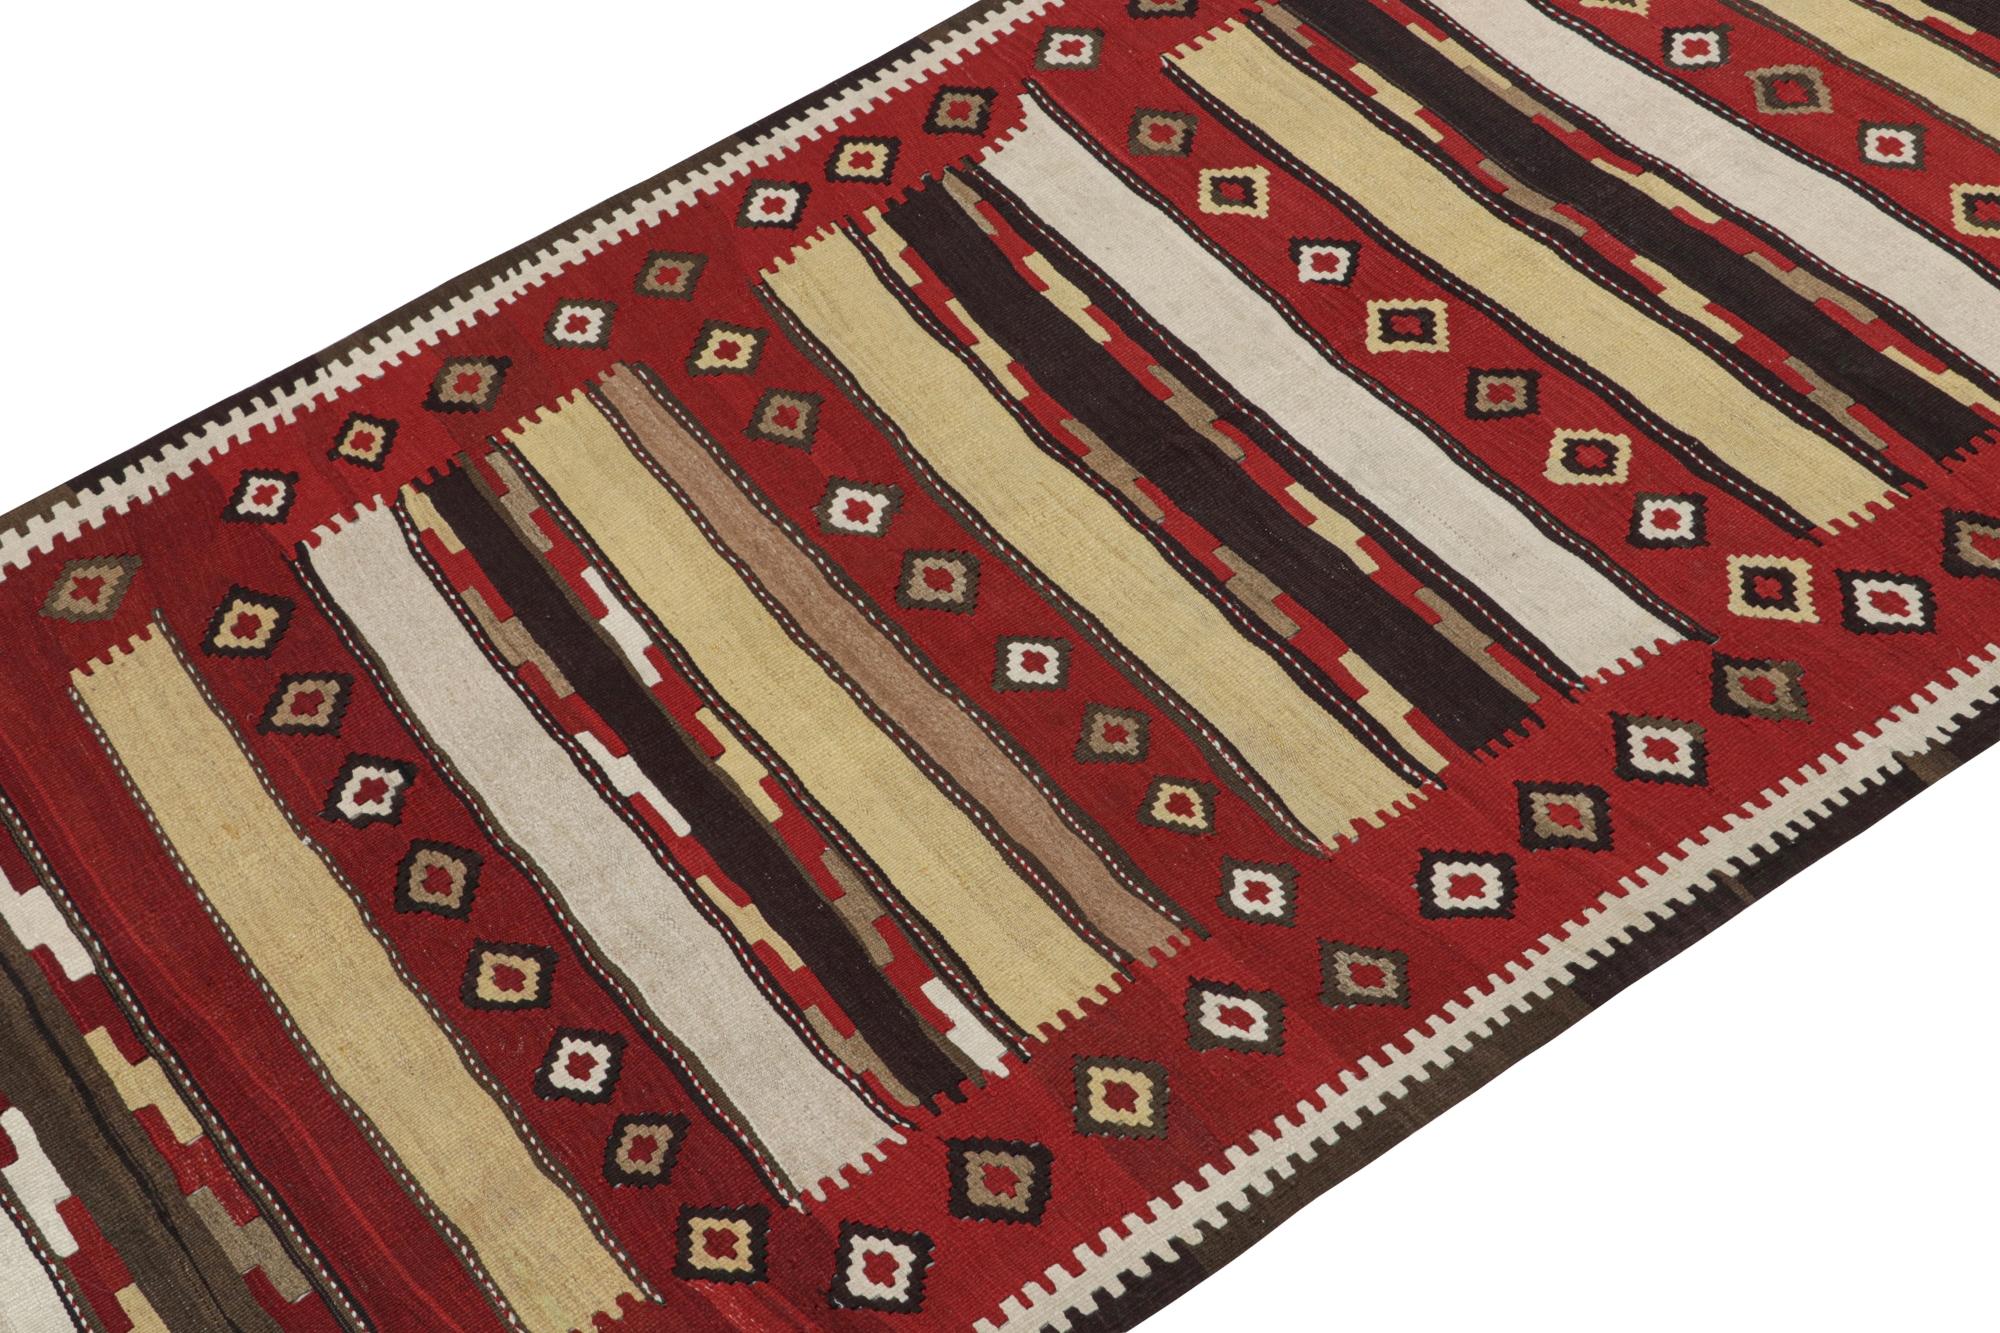 This vintage 5x11 Persian kilim is believed to be a Shahsavan tribal rug, handwoven in wool circa 1950-1960.

On the Design: 

This mid-century rug enjoys a complementary play of stripes and traditional geometric patterns. Its colorway favors a